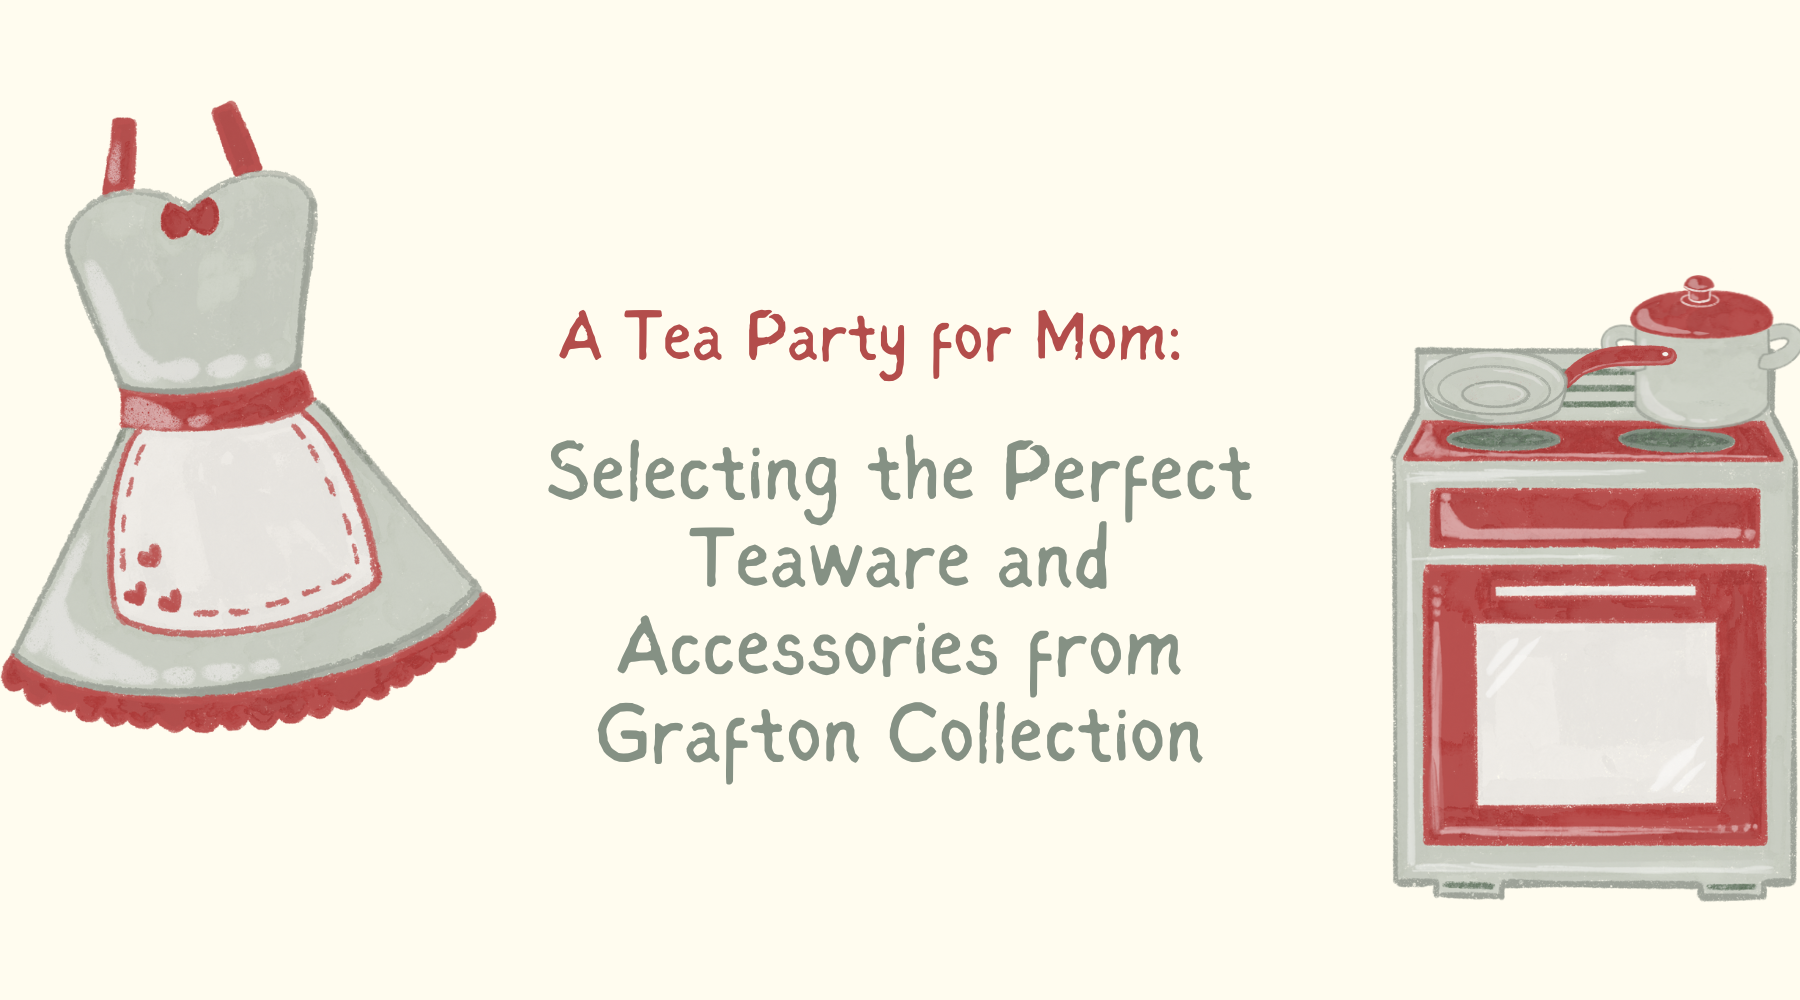 A Tea Party for Mom: Selecting the Perfect Teaware and Accessories from Grafton Collection